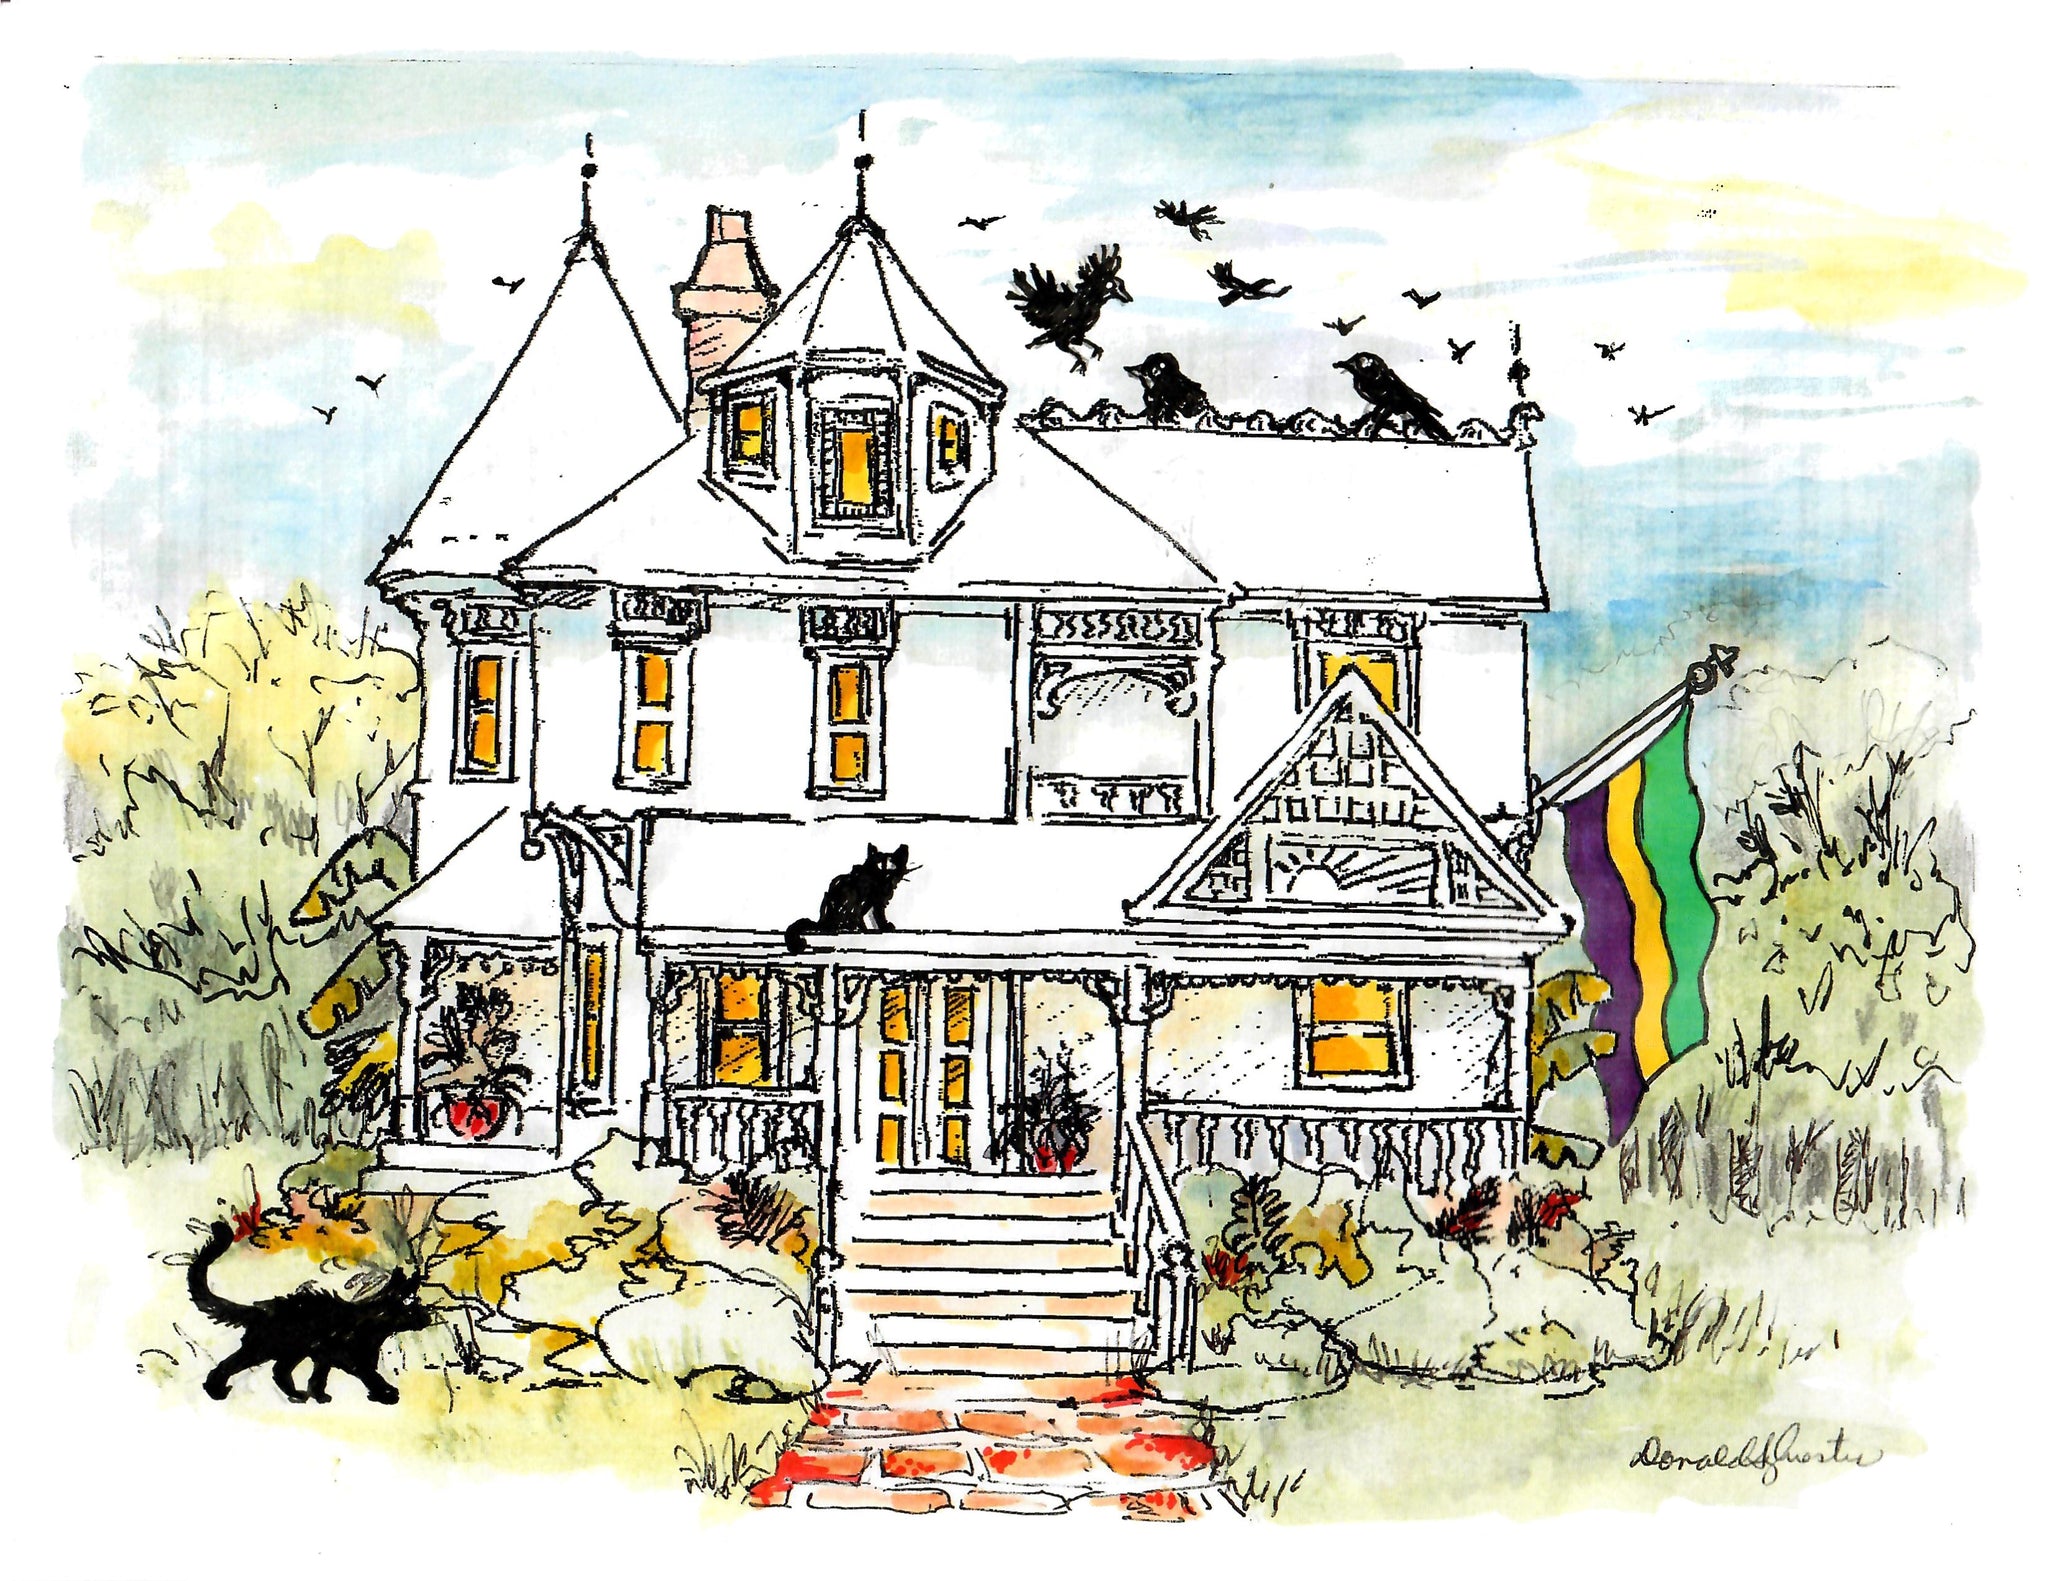 Cats And Birds Over A New Orleans White Uptown With Mardi Gras Flag